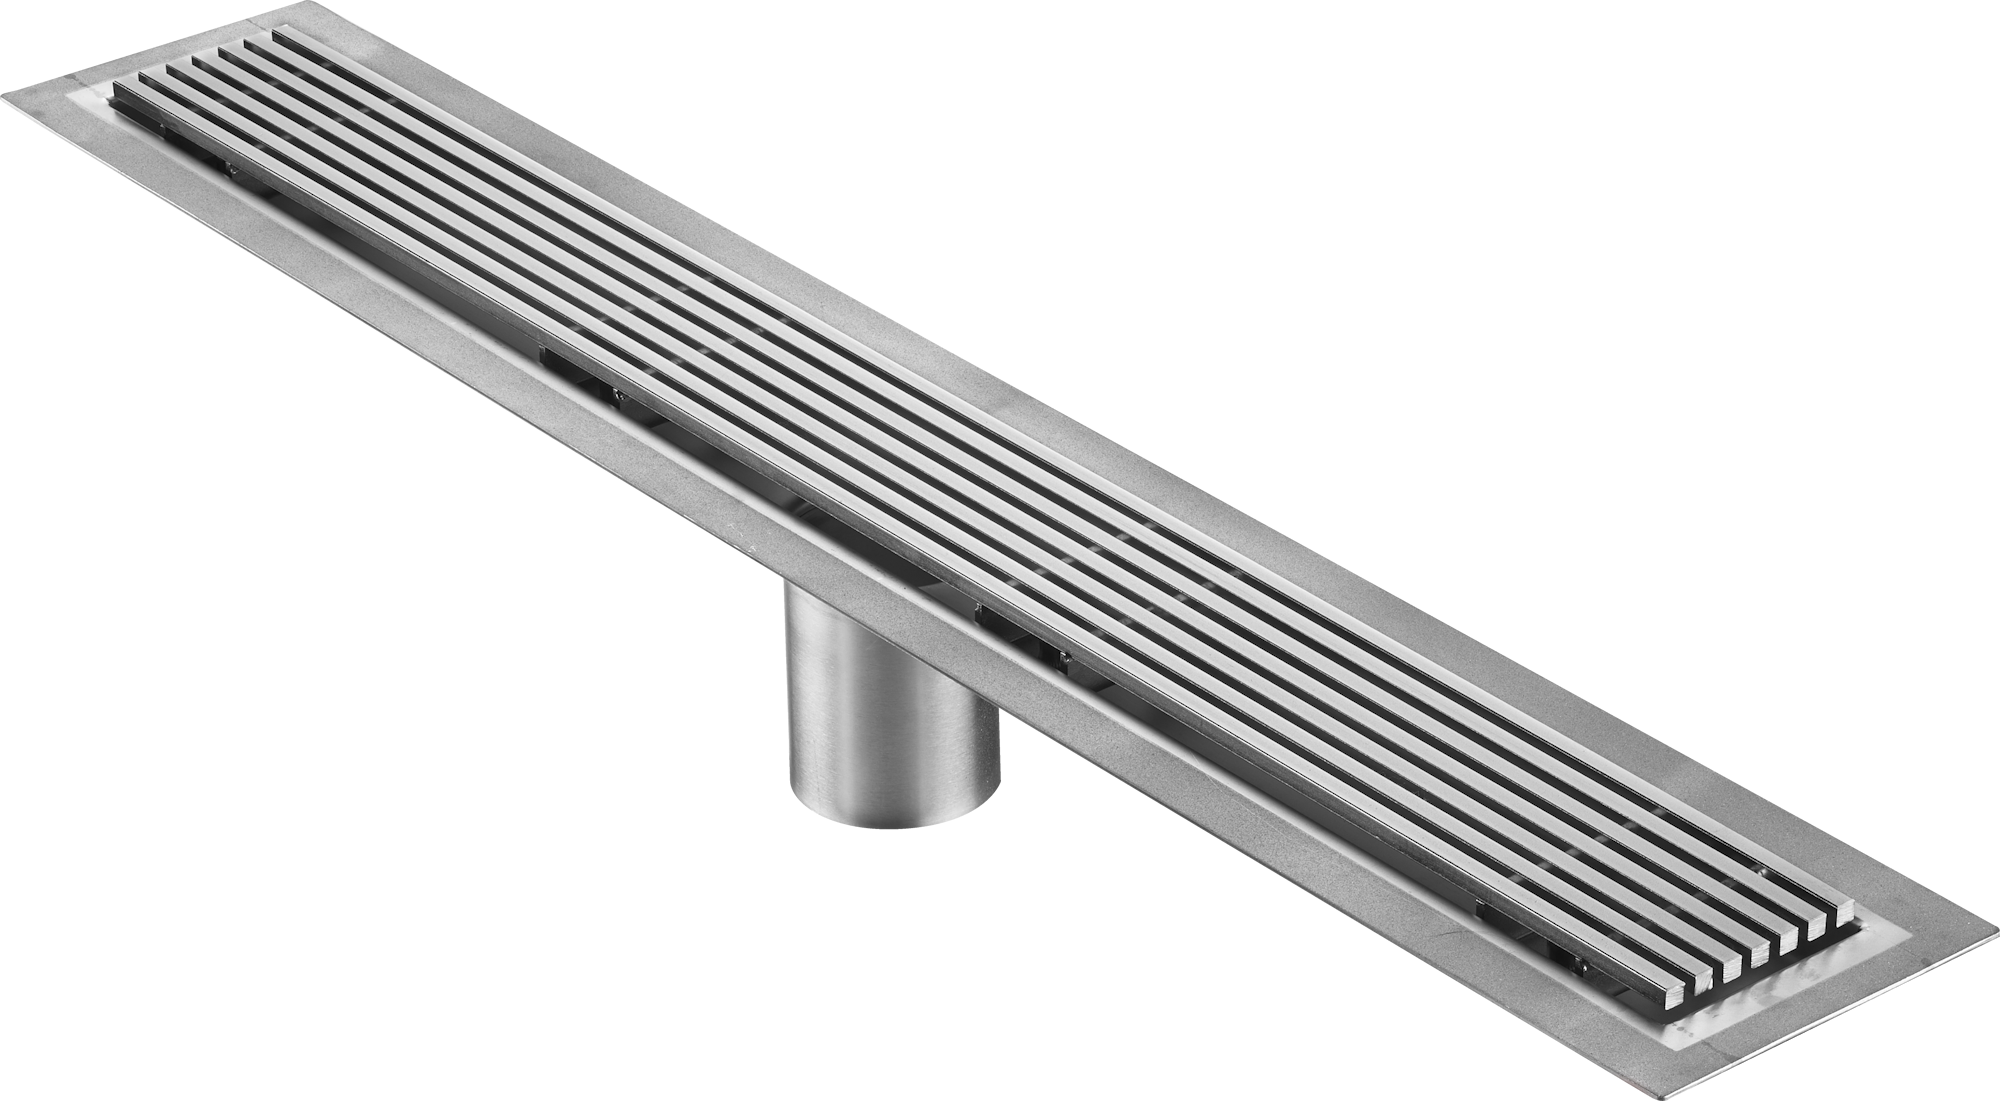 71 Inch Wedge Wire Grate Linear Drain Brushed Stainless Steel, Drains Unlimited